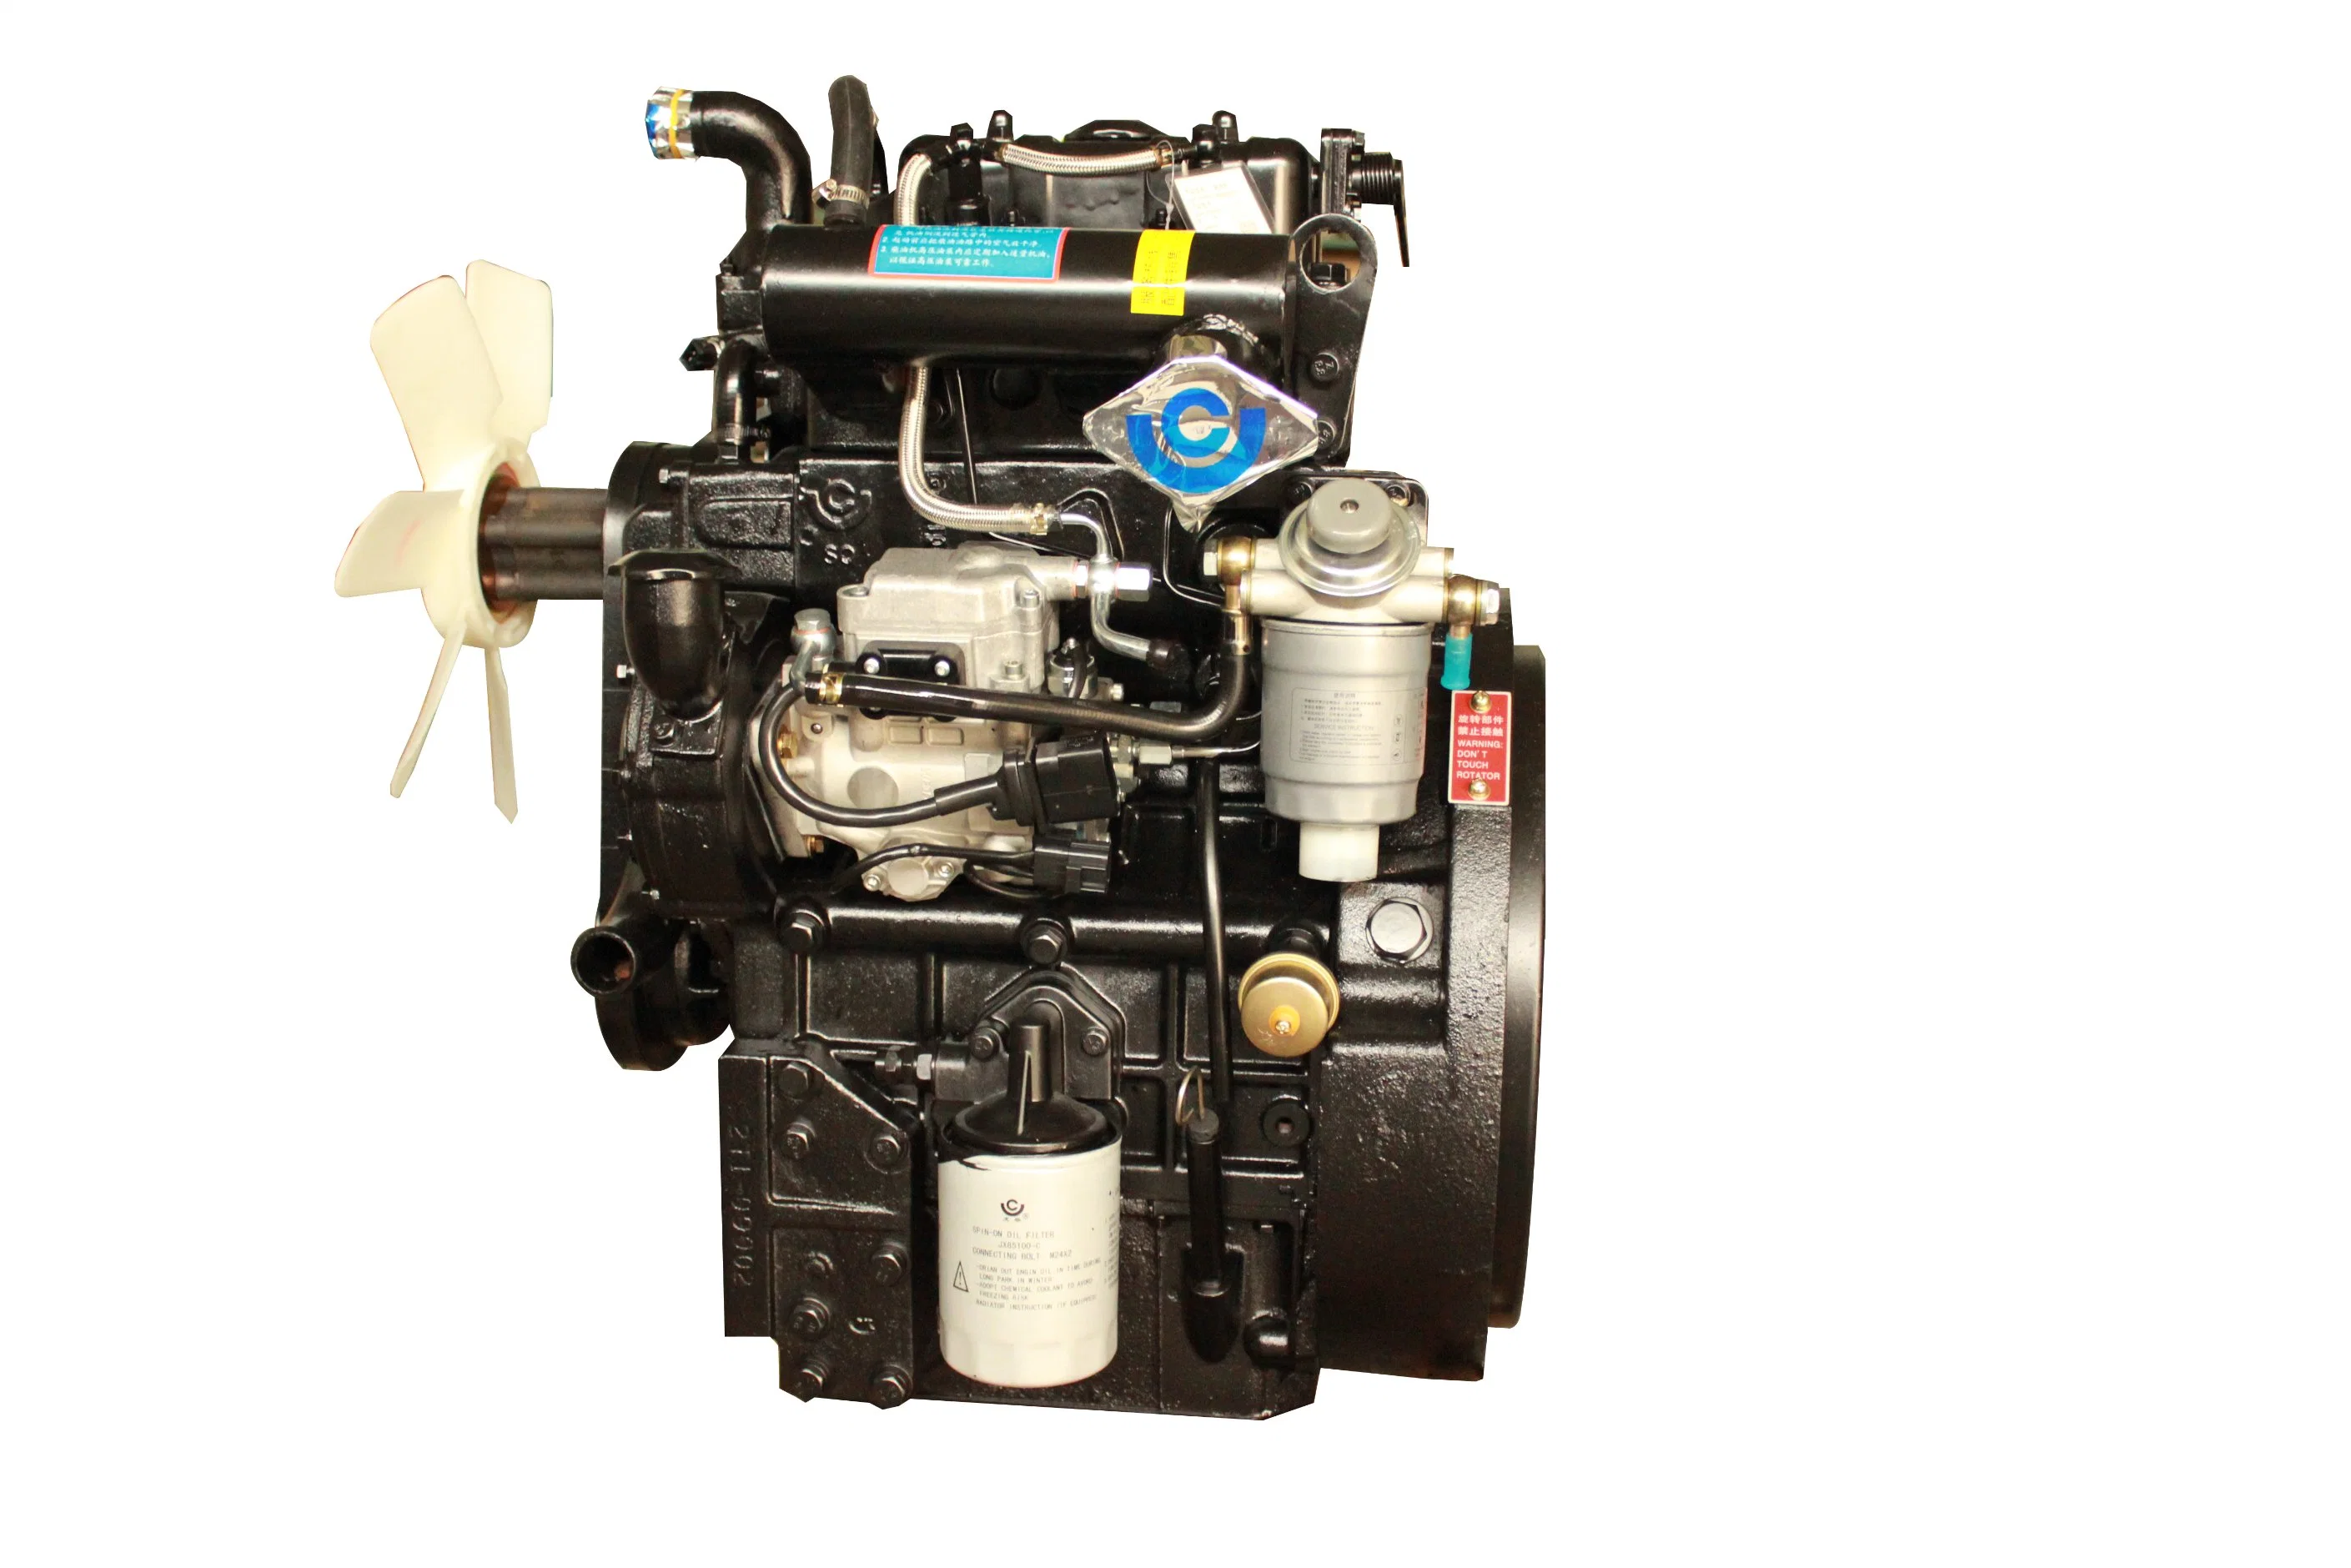 26.2kw Yuchai 2 Cylinder Diesel Engine for Standby Prime Power Generator for Military/Marine Use